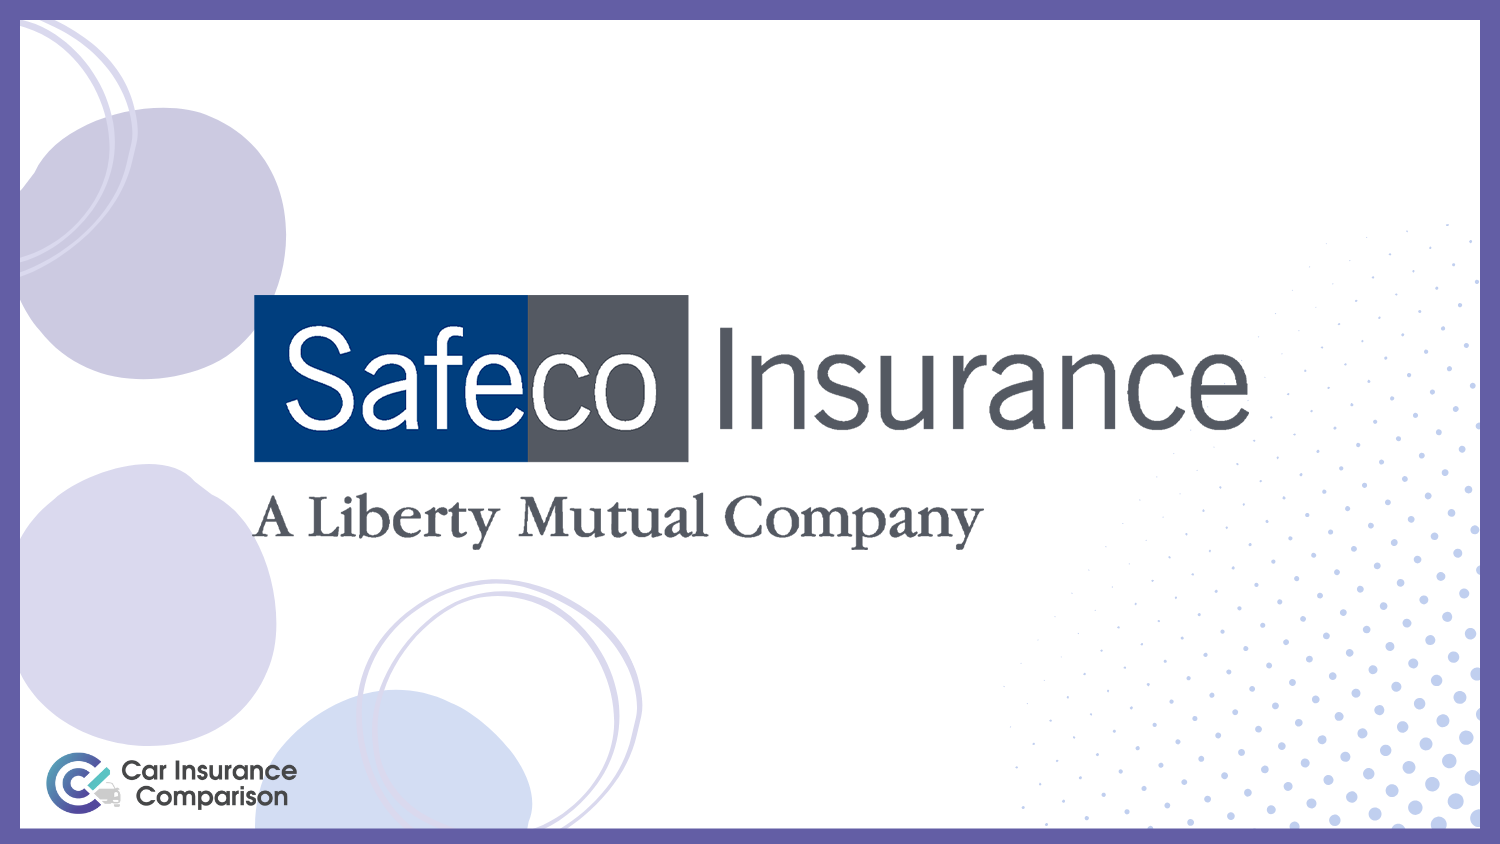 Safeco: Compare Best Car Insurance Companies That Accept a Suspended License